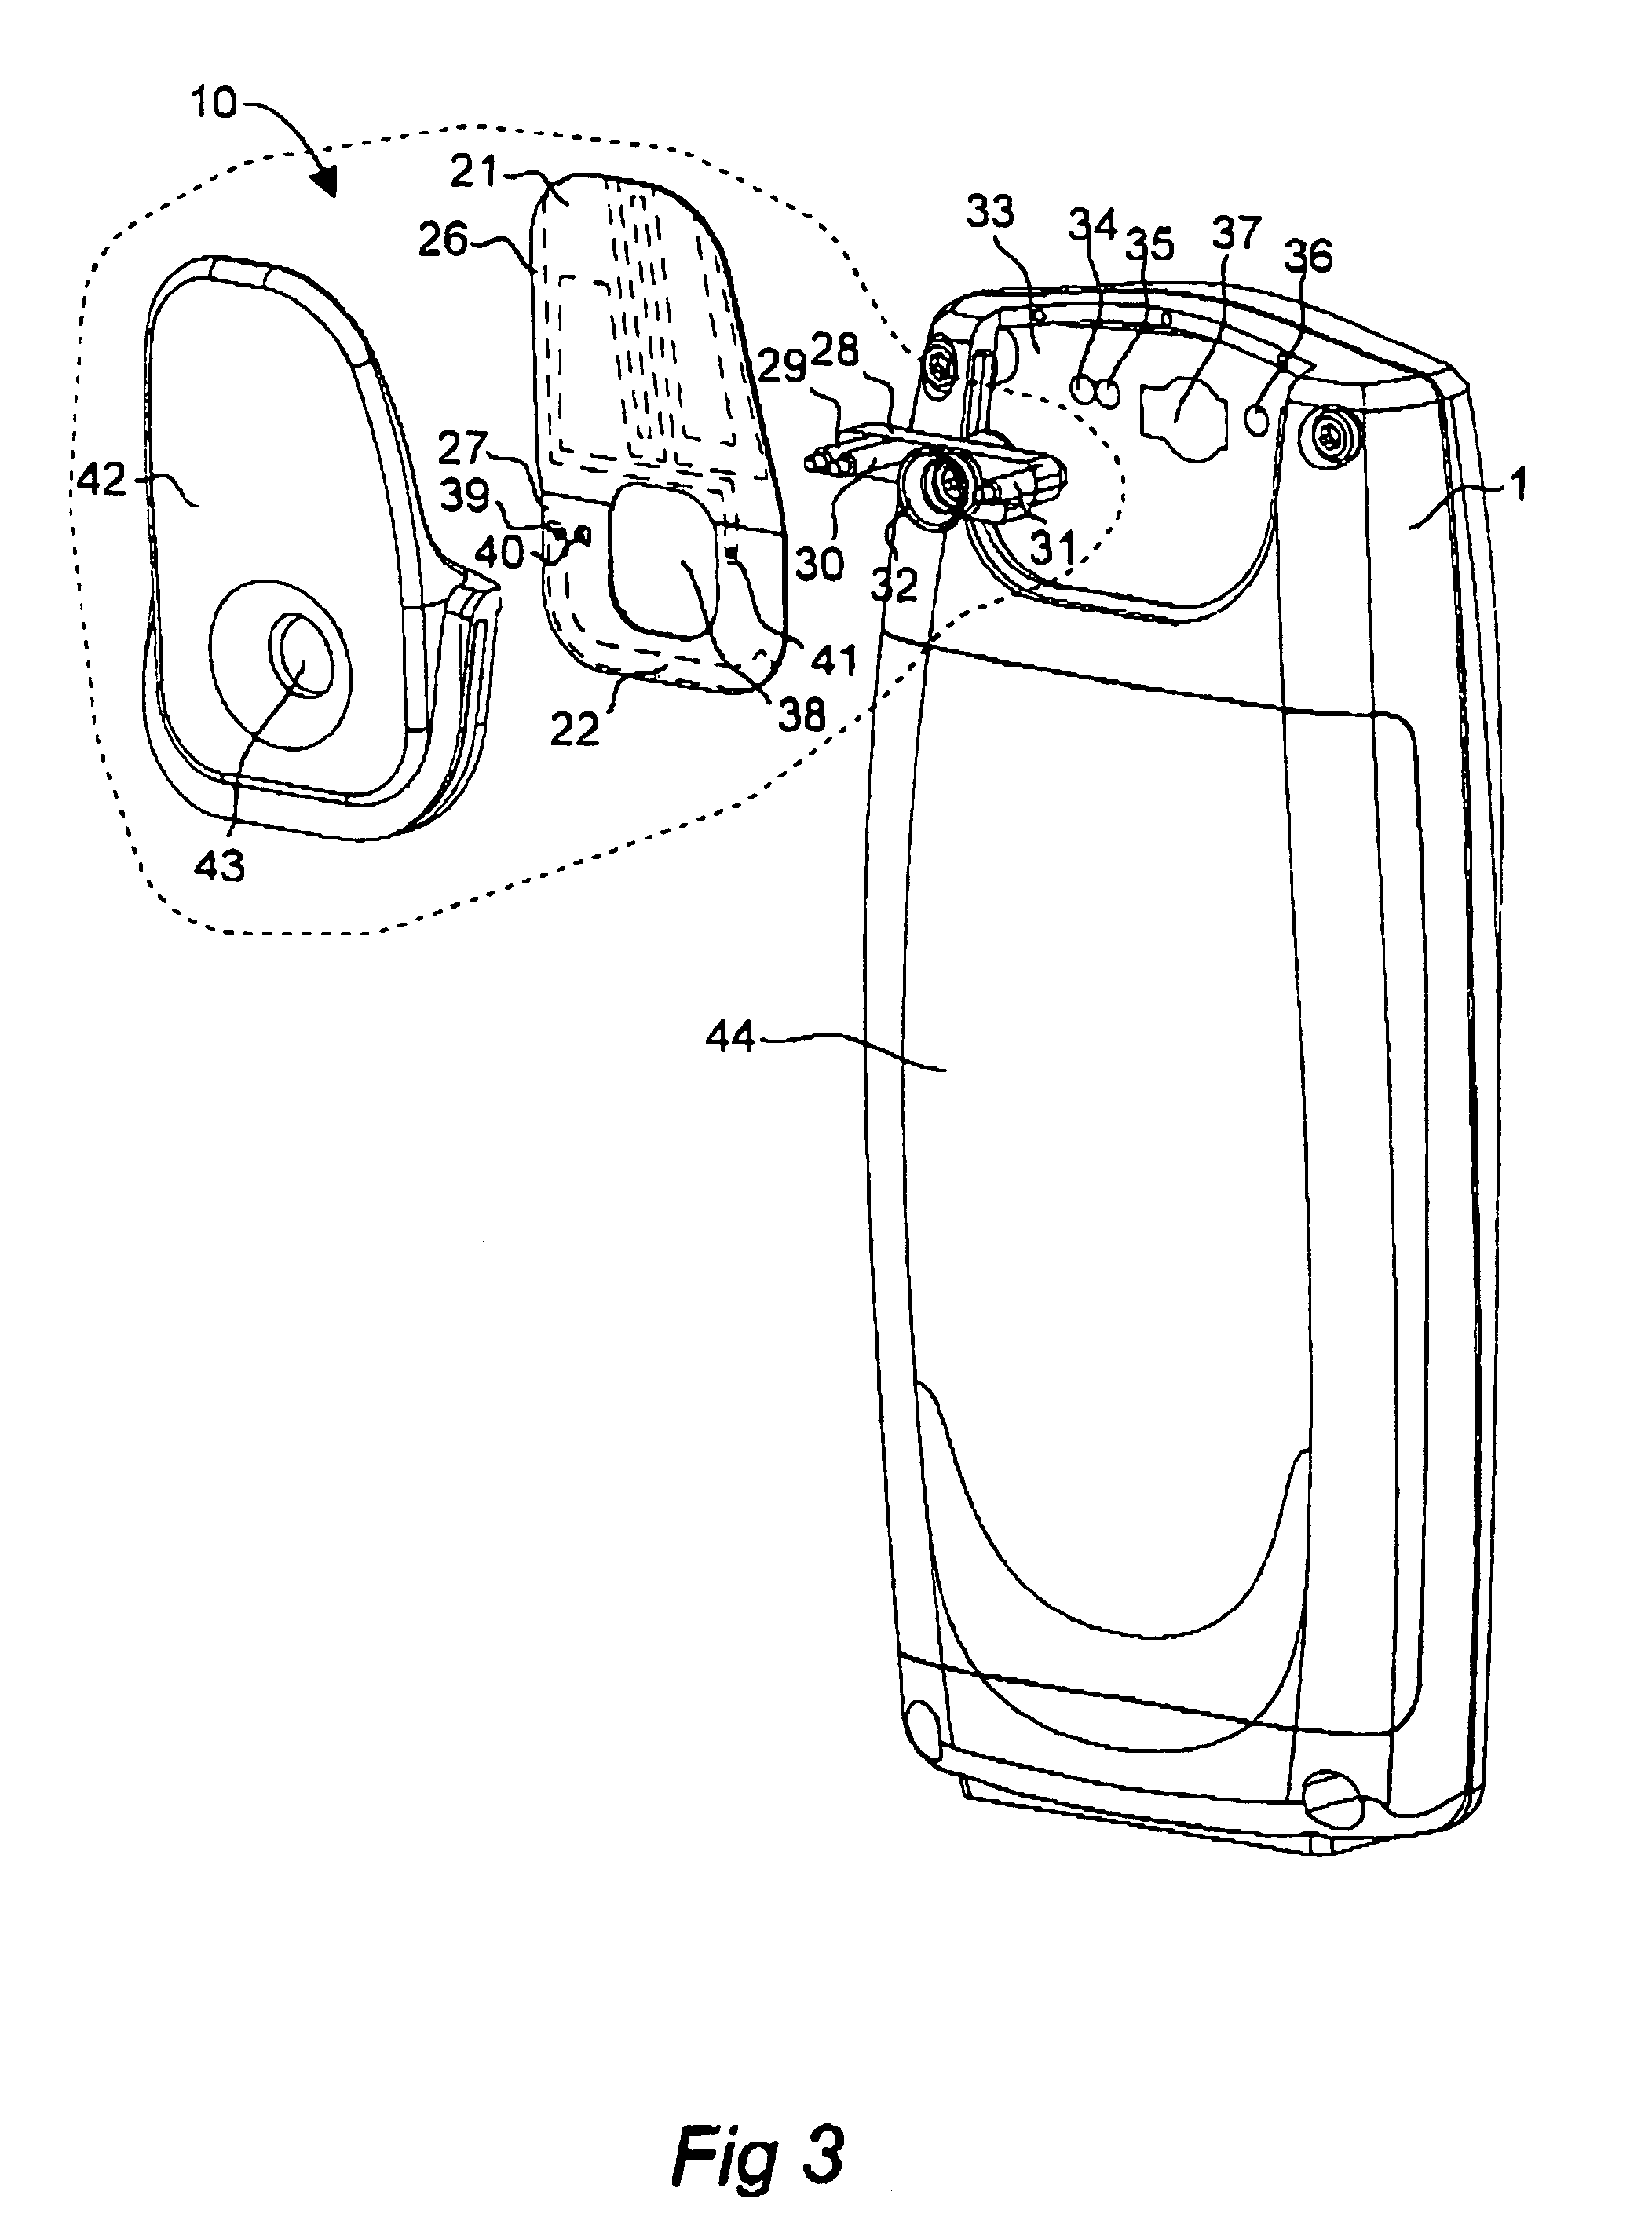 Antenna device, and a portable telecommunication apparatus including such an antenna device